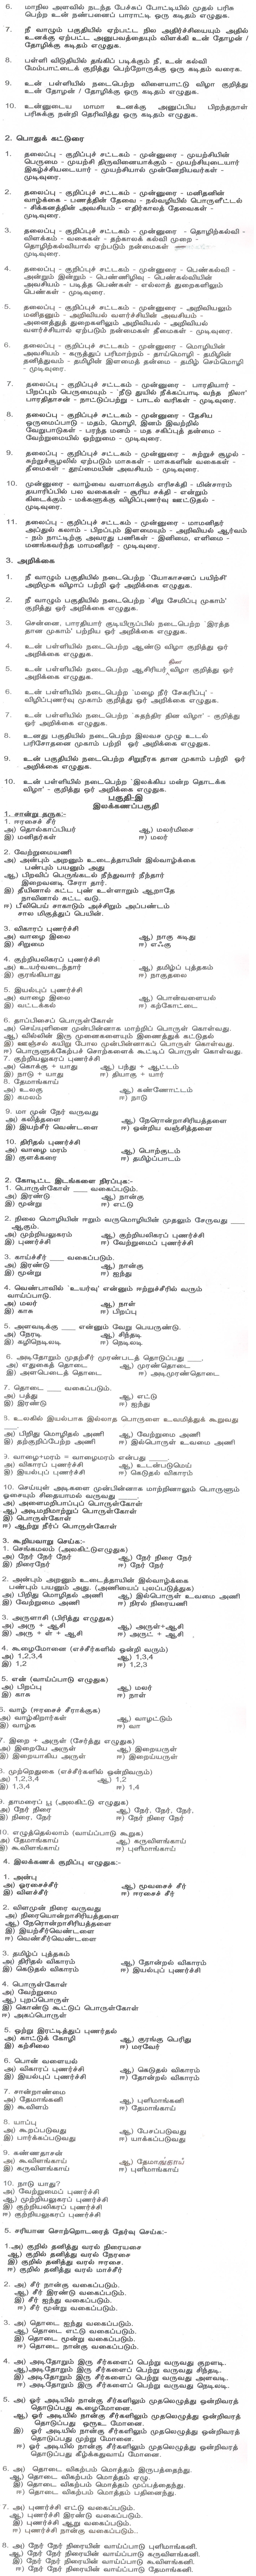 CBSE Class 9 Question Bank - Tamil